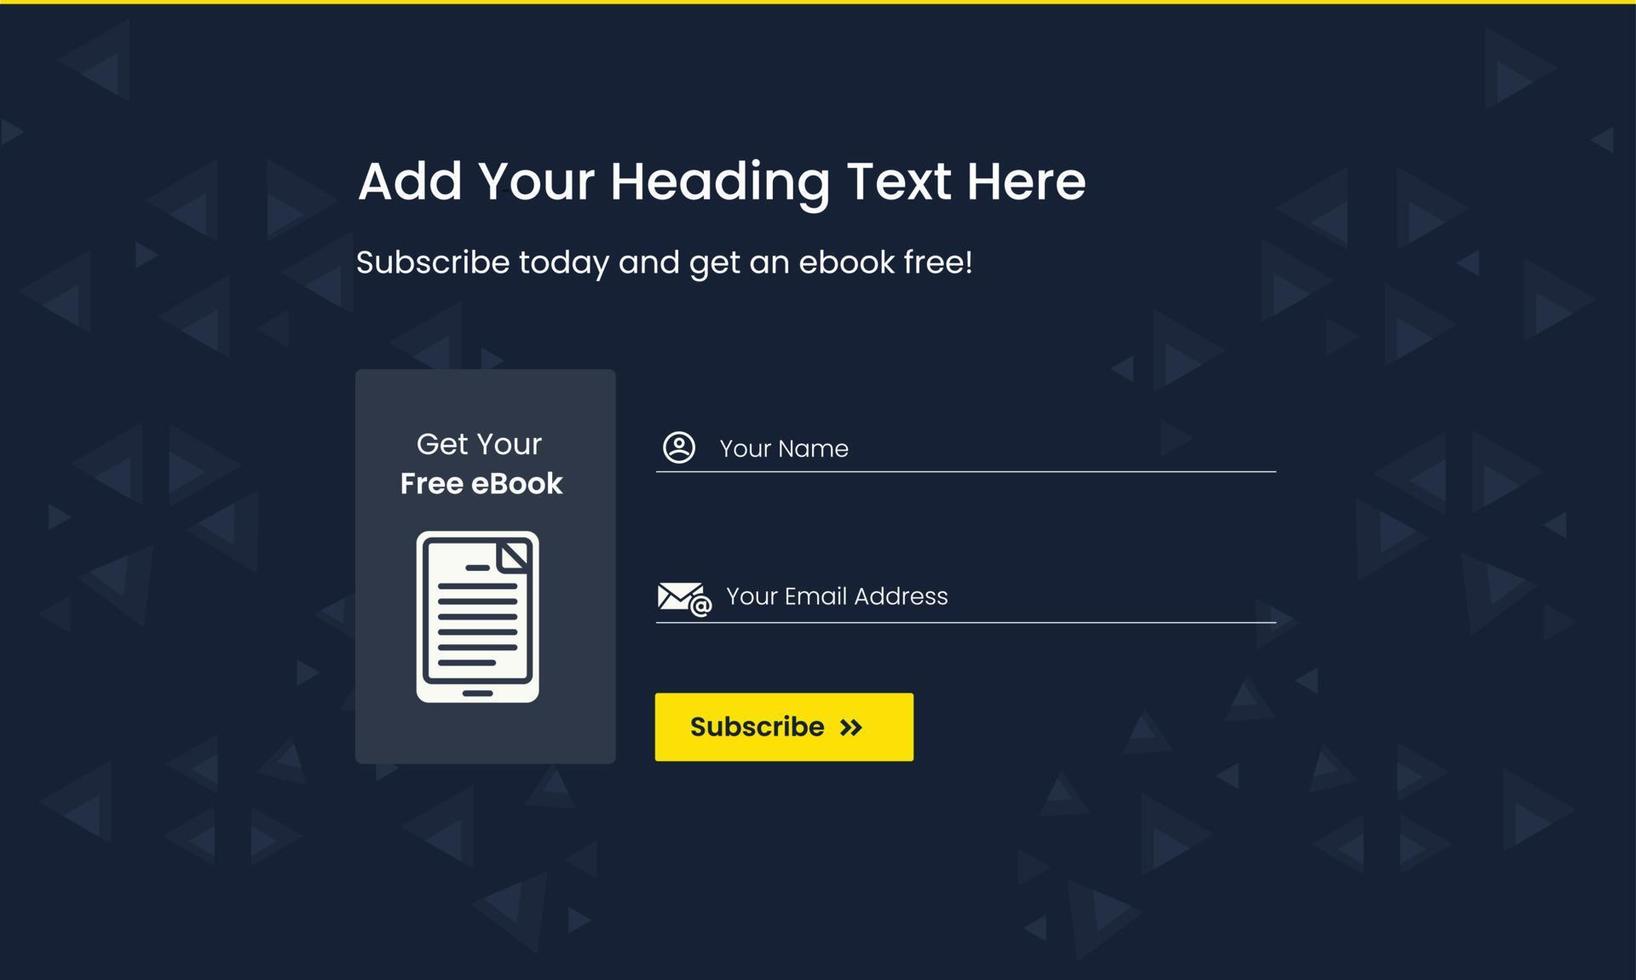 Subscribe now and get your free eBook showing name and email, for subscription purpose with abstract background for website footer,  mailer, social media, online teaching, blog, form, newsletter. vector